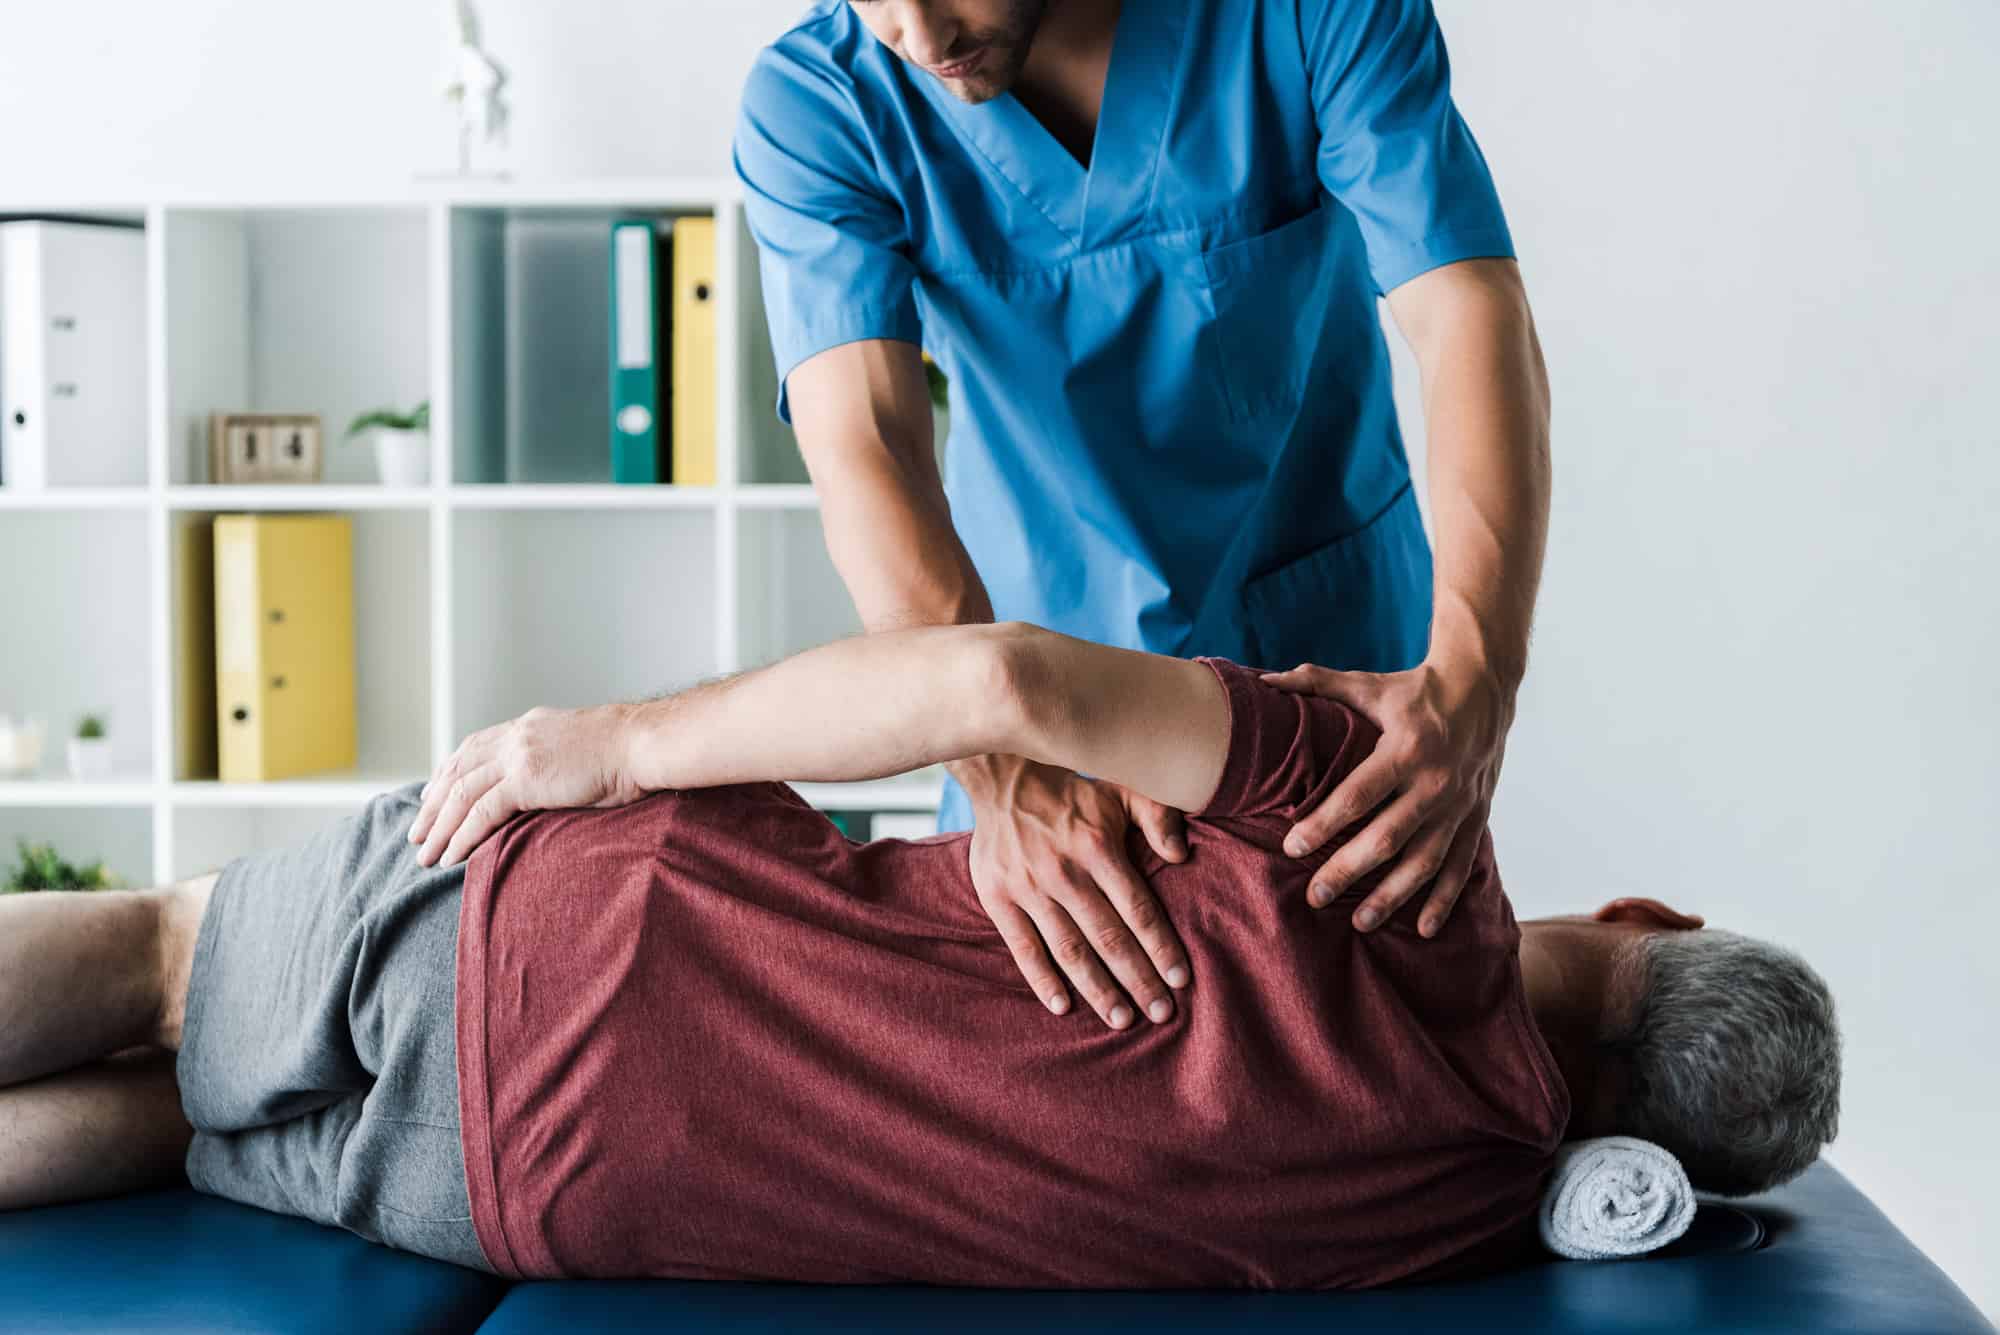 Chiropractic Helps Lower Surgeries, Days in Hospital, and Drug Costs